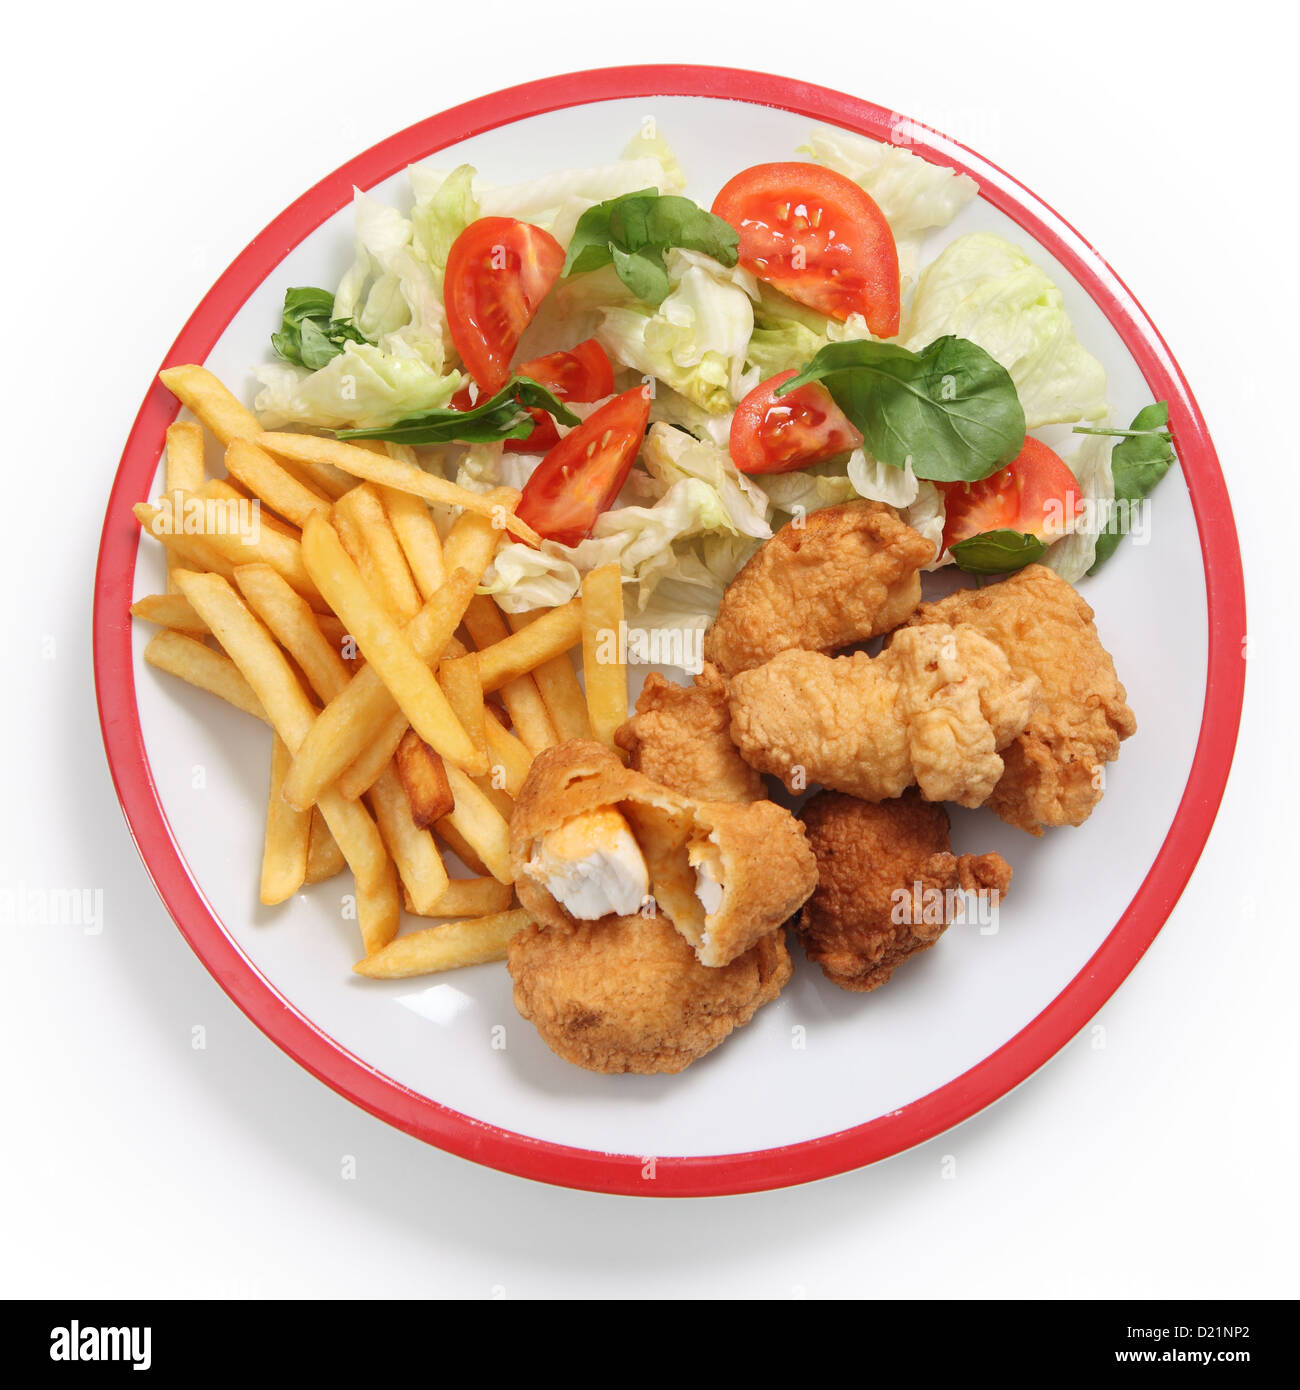 A meal of homemade kingfish nuggets served with french fried potato chips and a salad of tomato, lettuce and rocket. Stock Photo